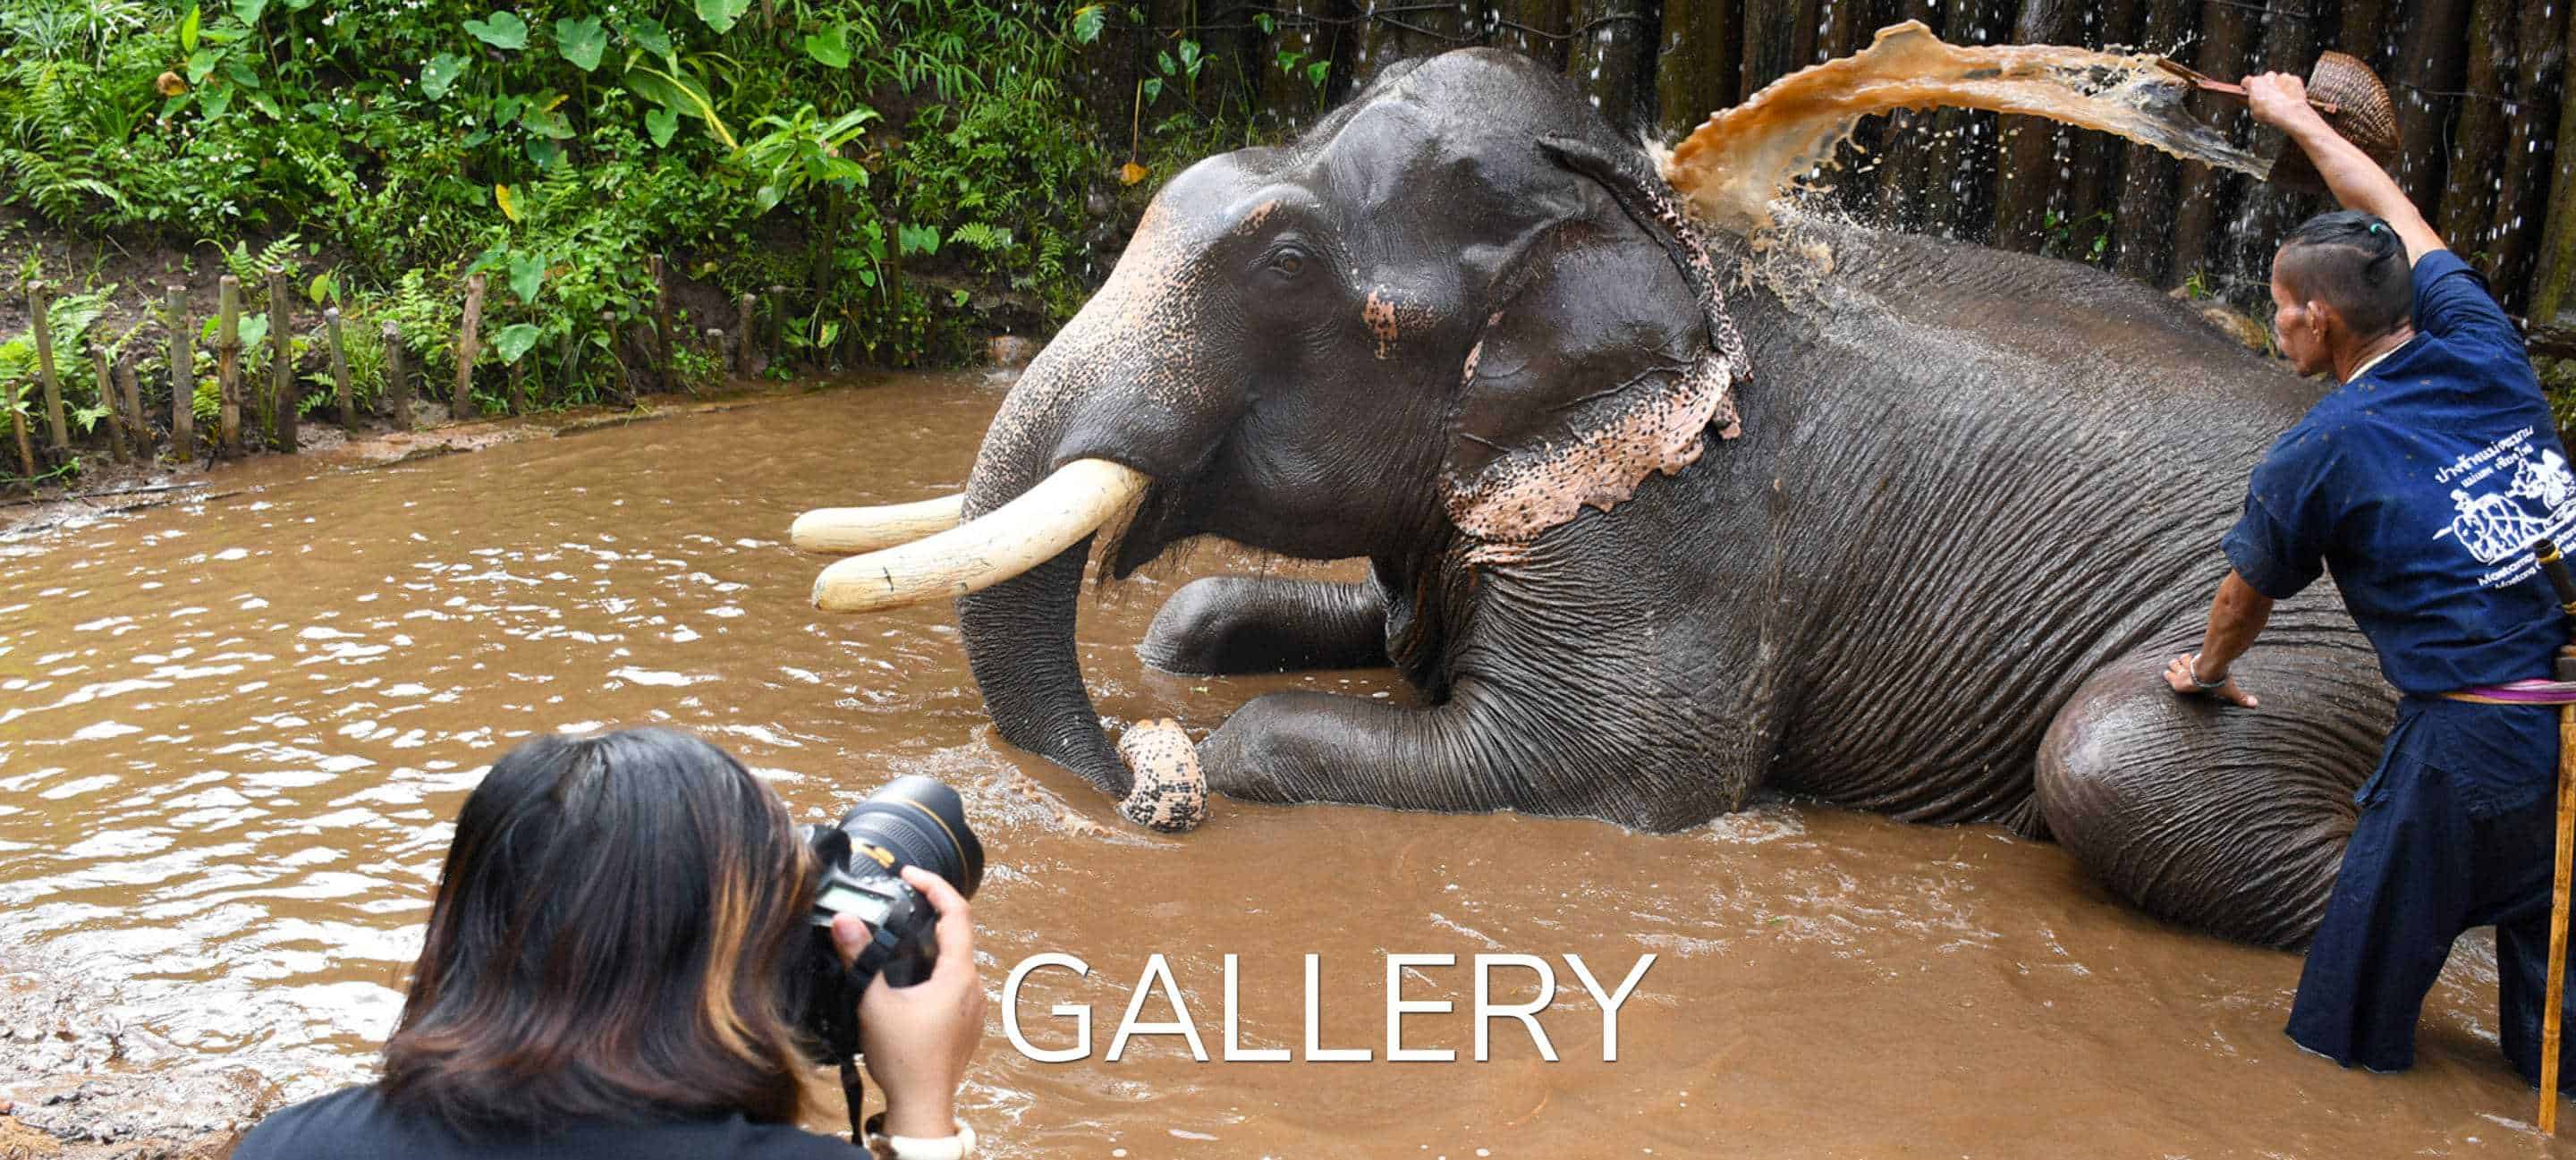 EXPERIENCE ELEPHANTS UP CLOSE AND PERSONAL on a wilderness elephant adventure near Chiang Mai - photographer taking picture of elephant in water bath